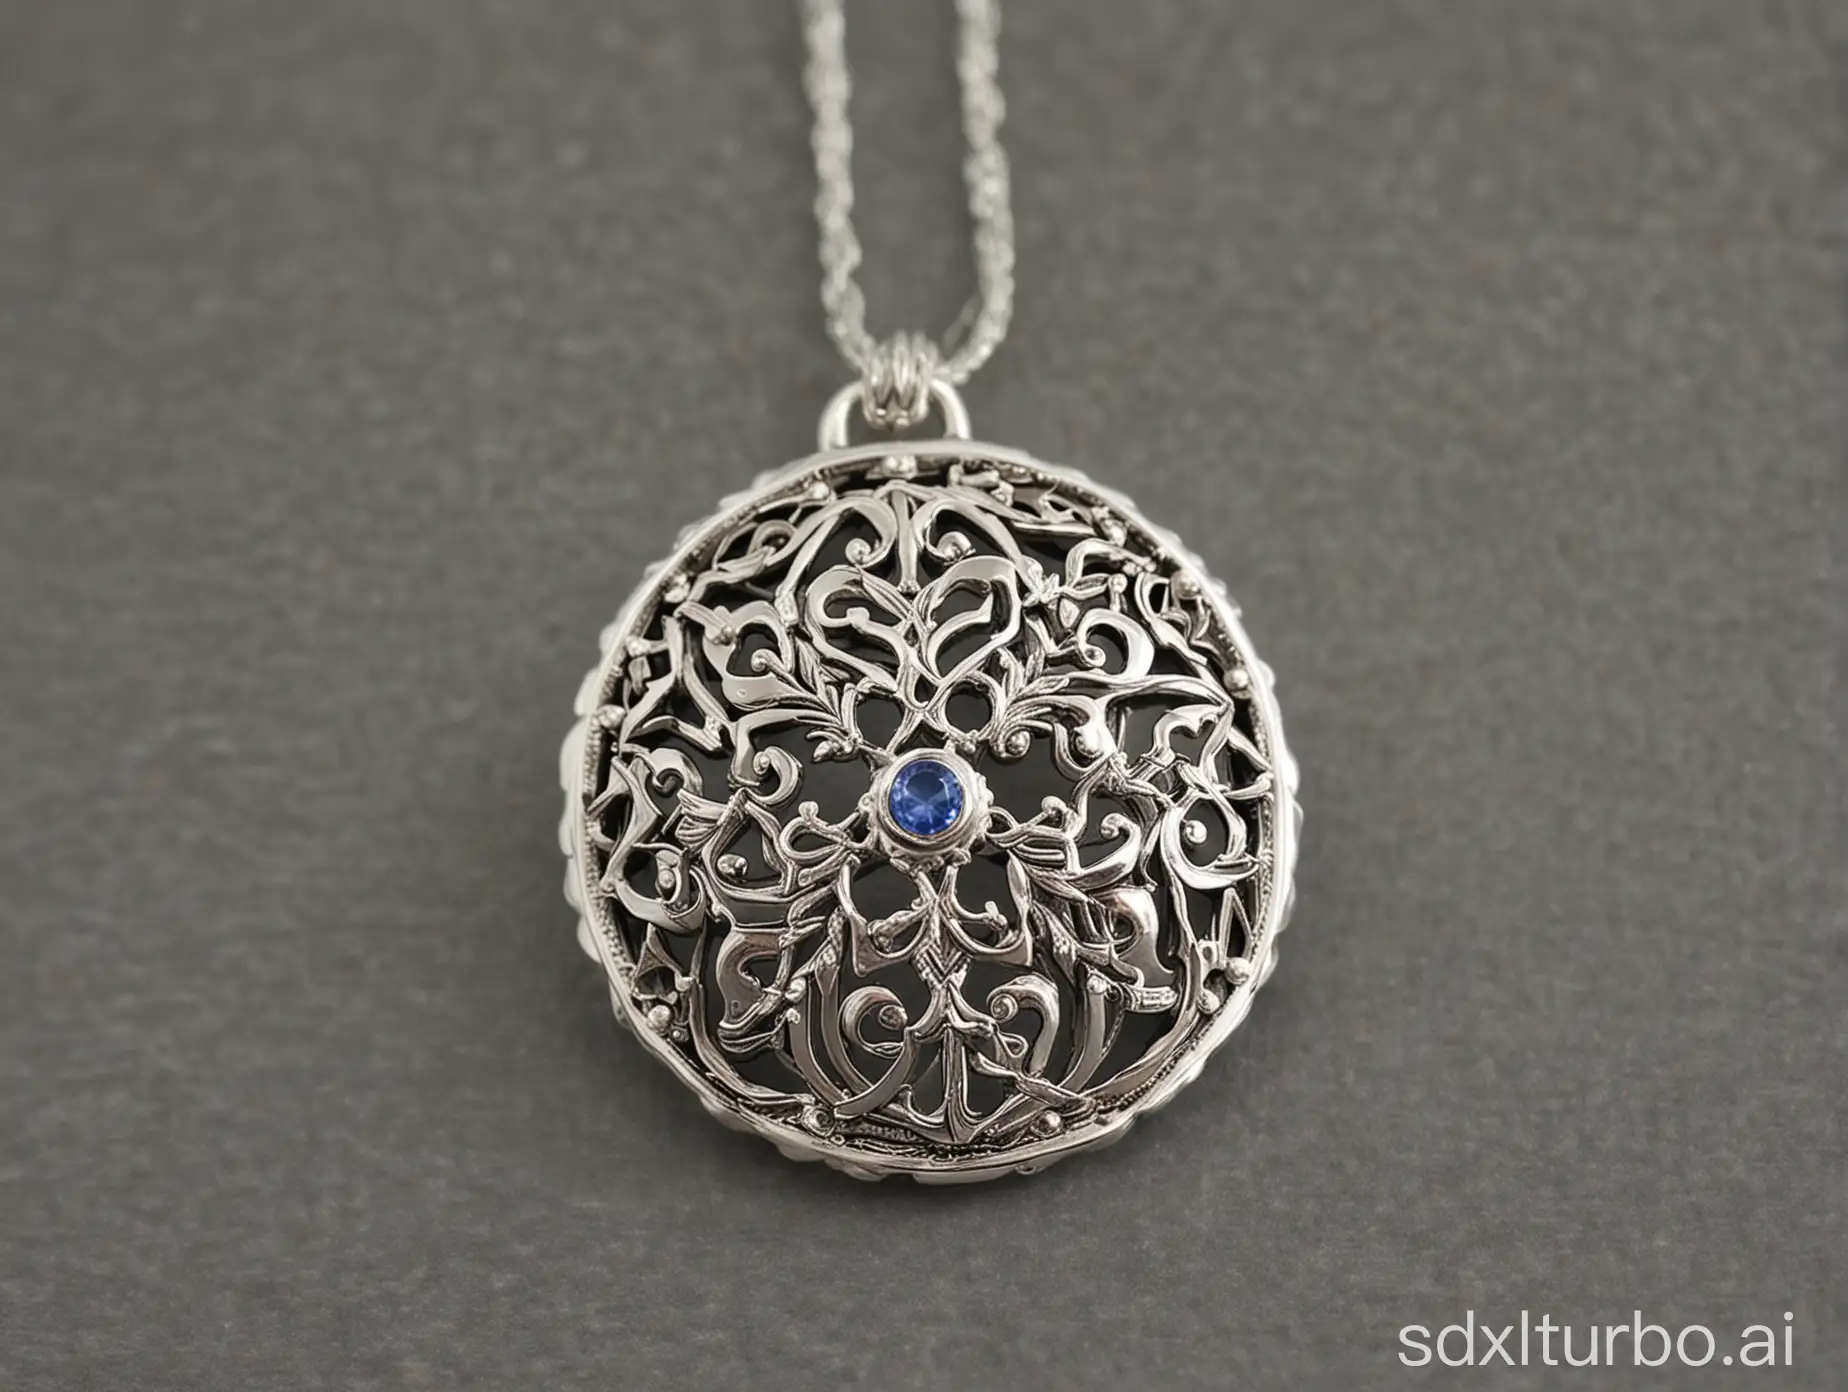 A photo of a beautiful piece of jewelry that is made from sterling silver.